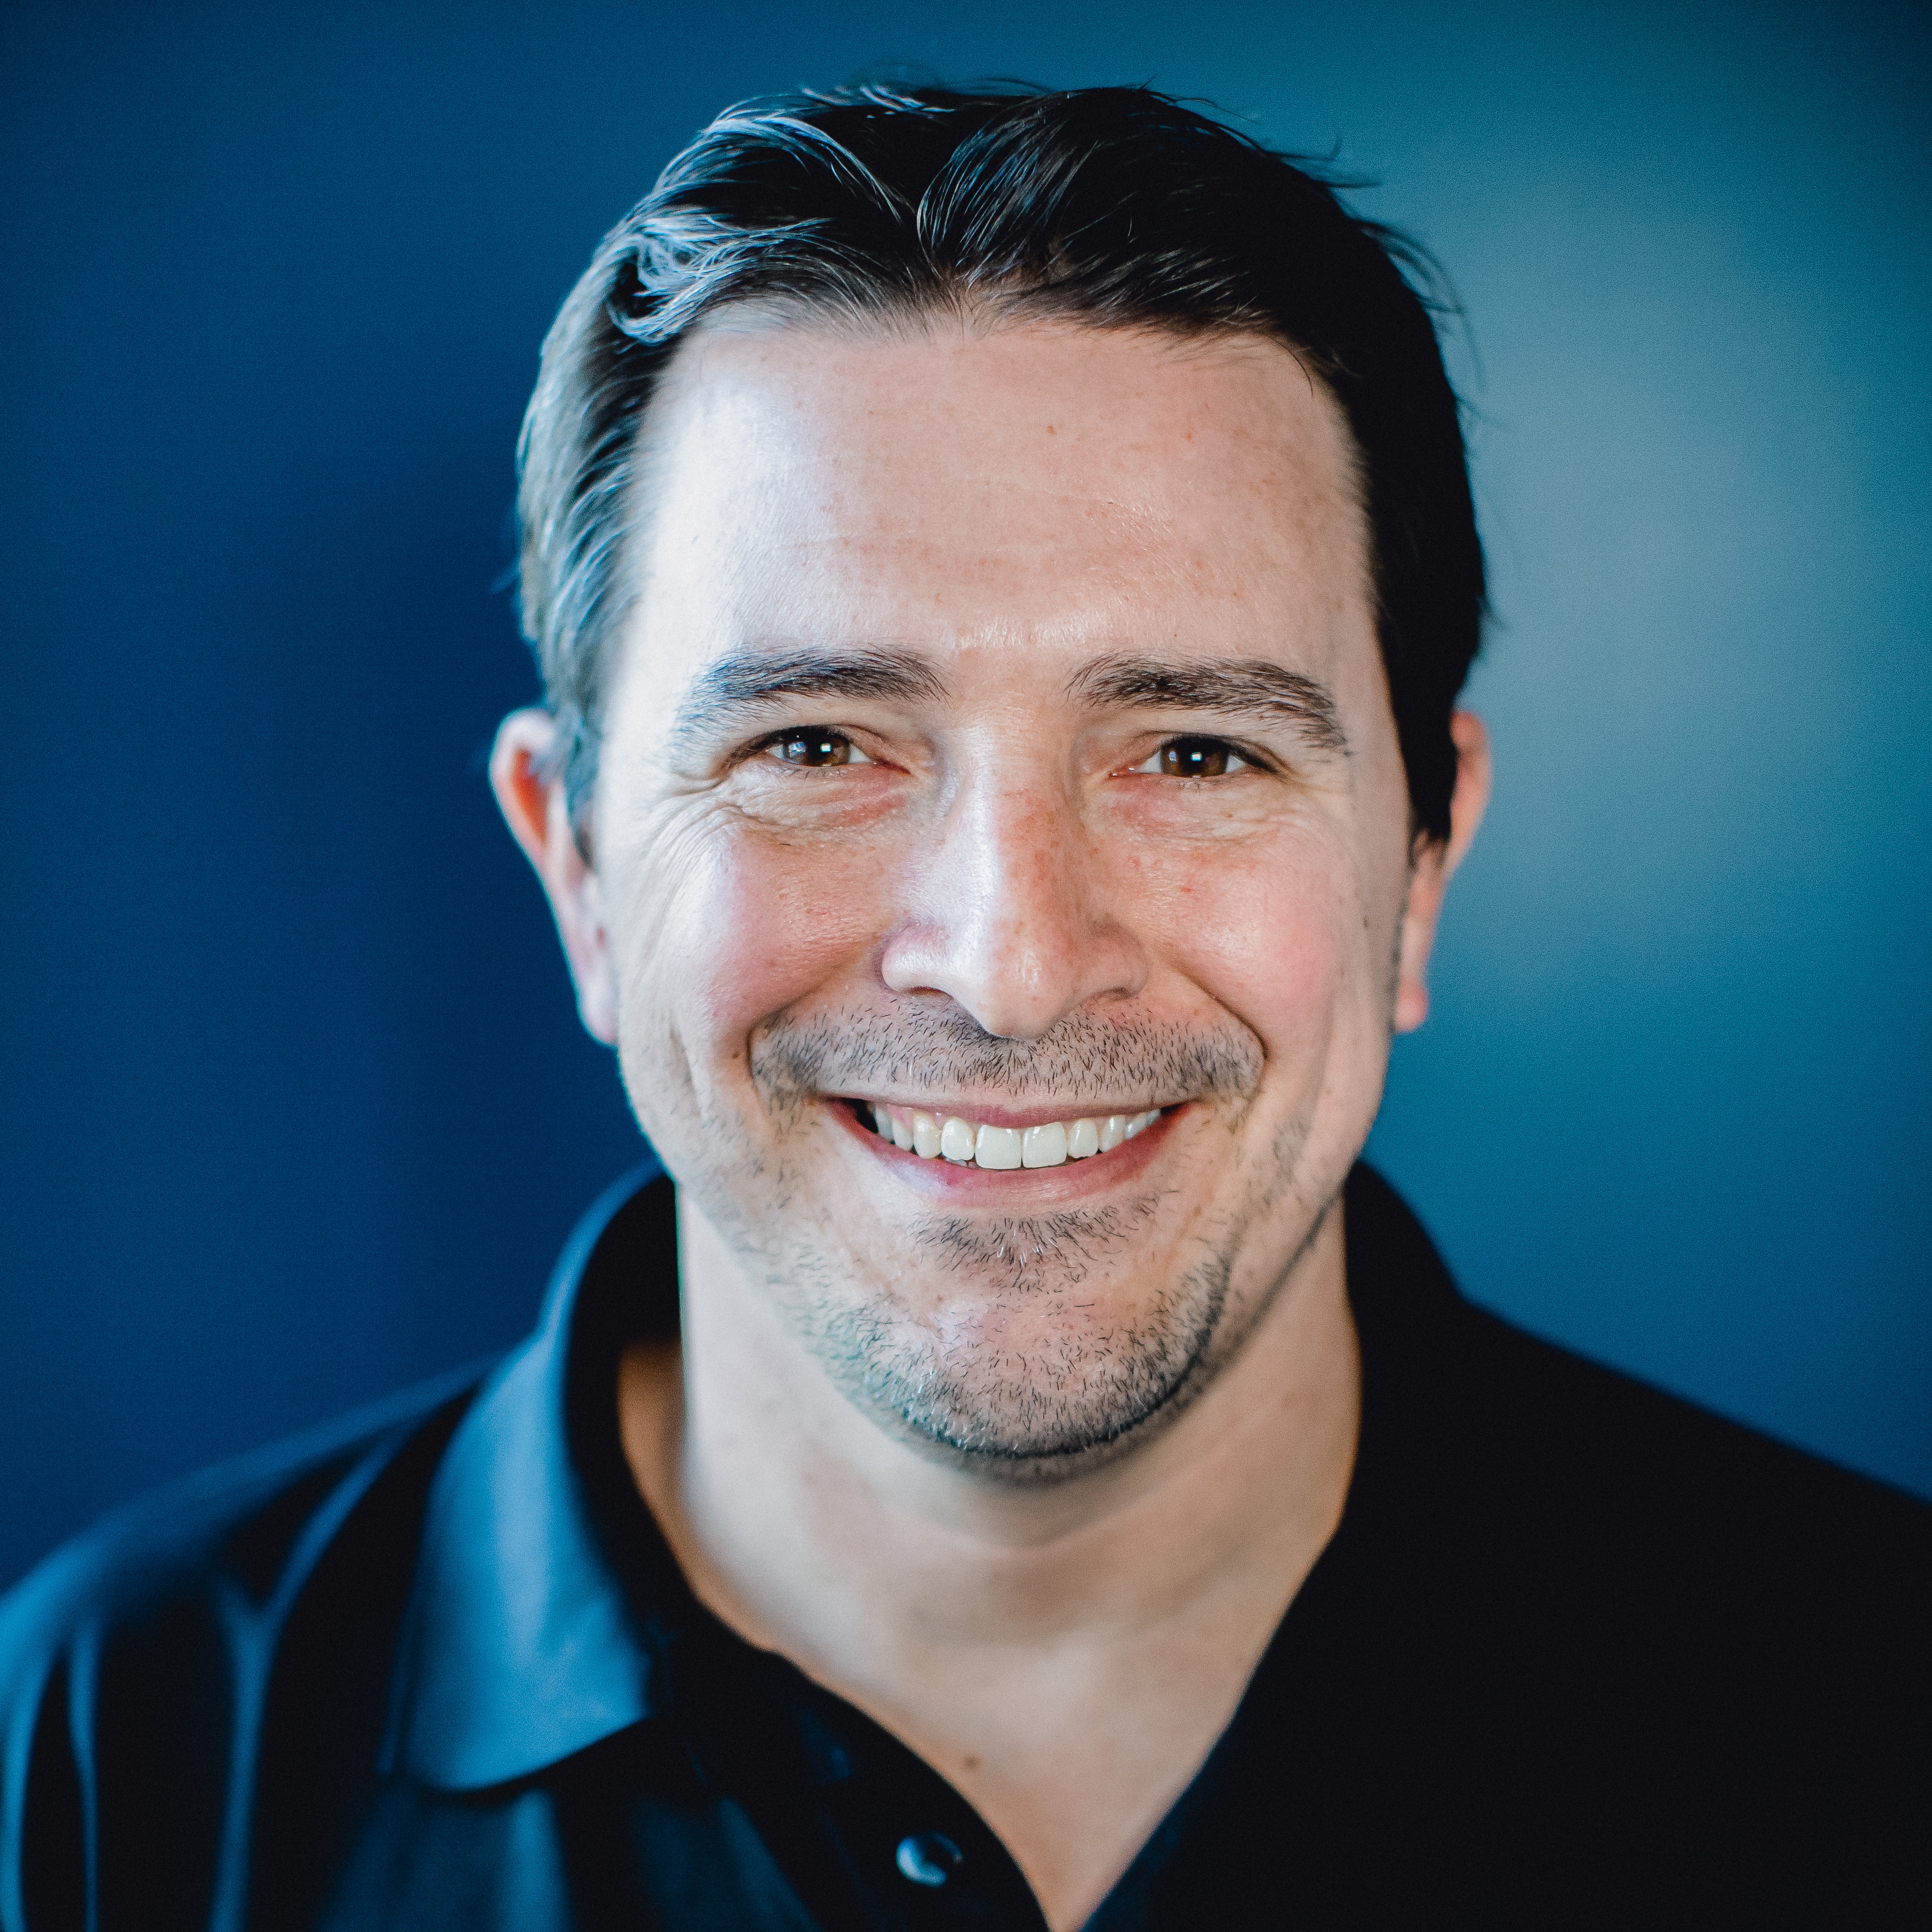 Bryan Johnson, WeInfuse CEO and Co-Founder